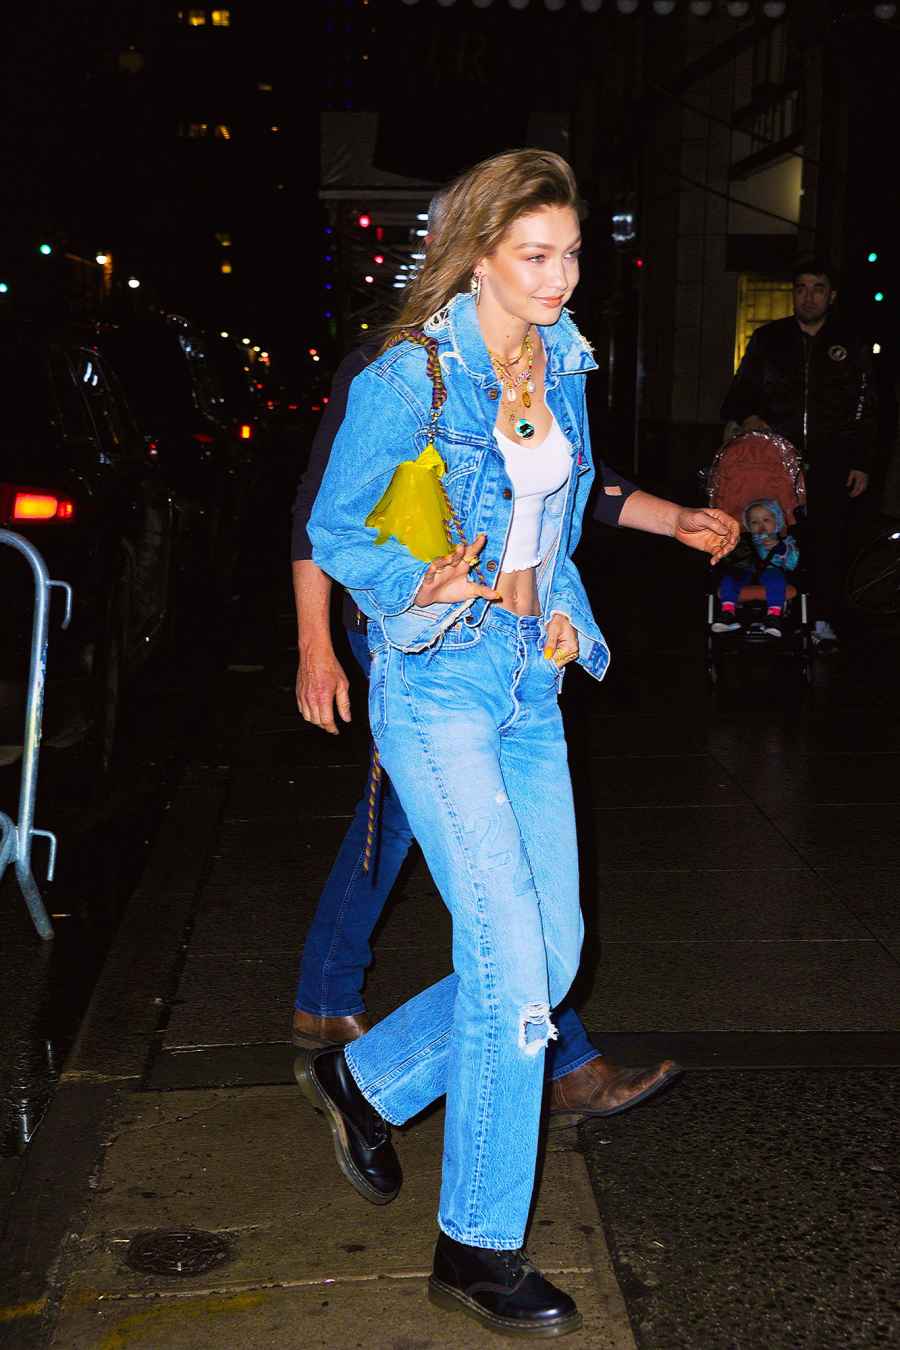 Gigi Hadid's Famous Friends and Family Celebrate Her Bday in Denim-on-Denim, See Every Look